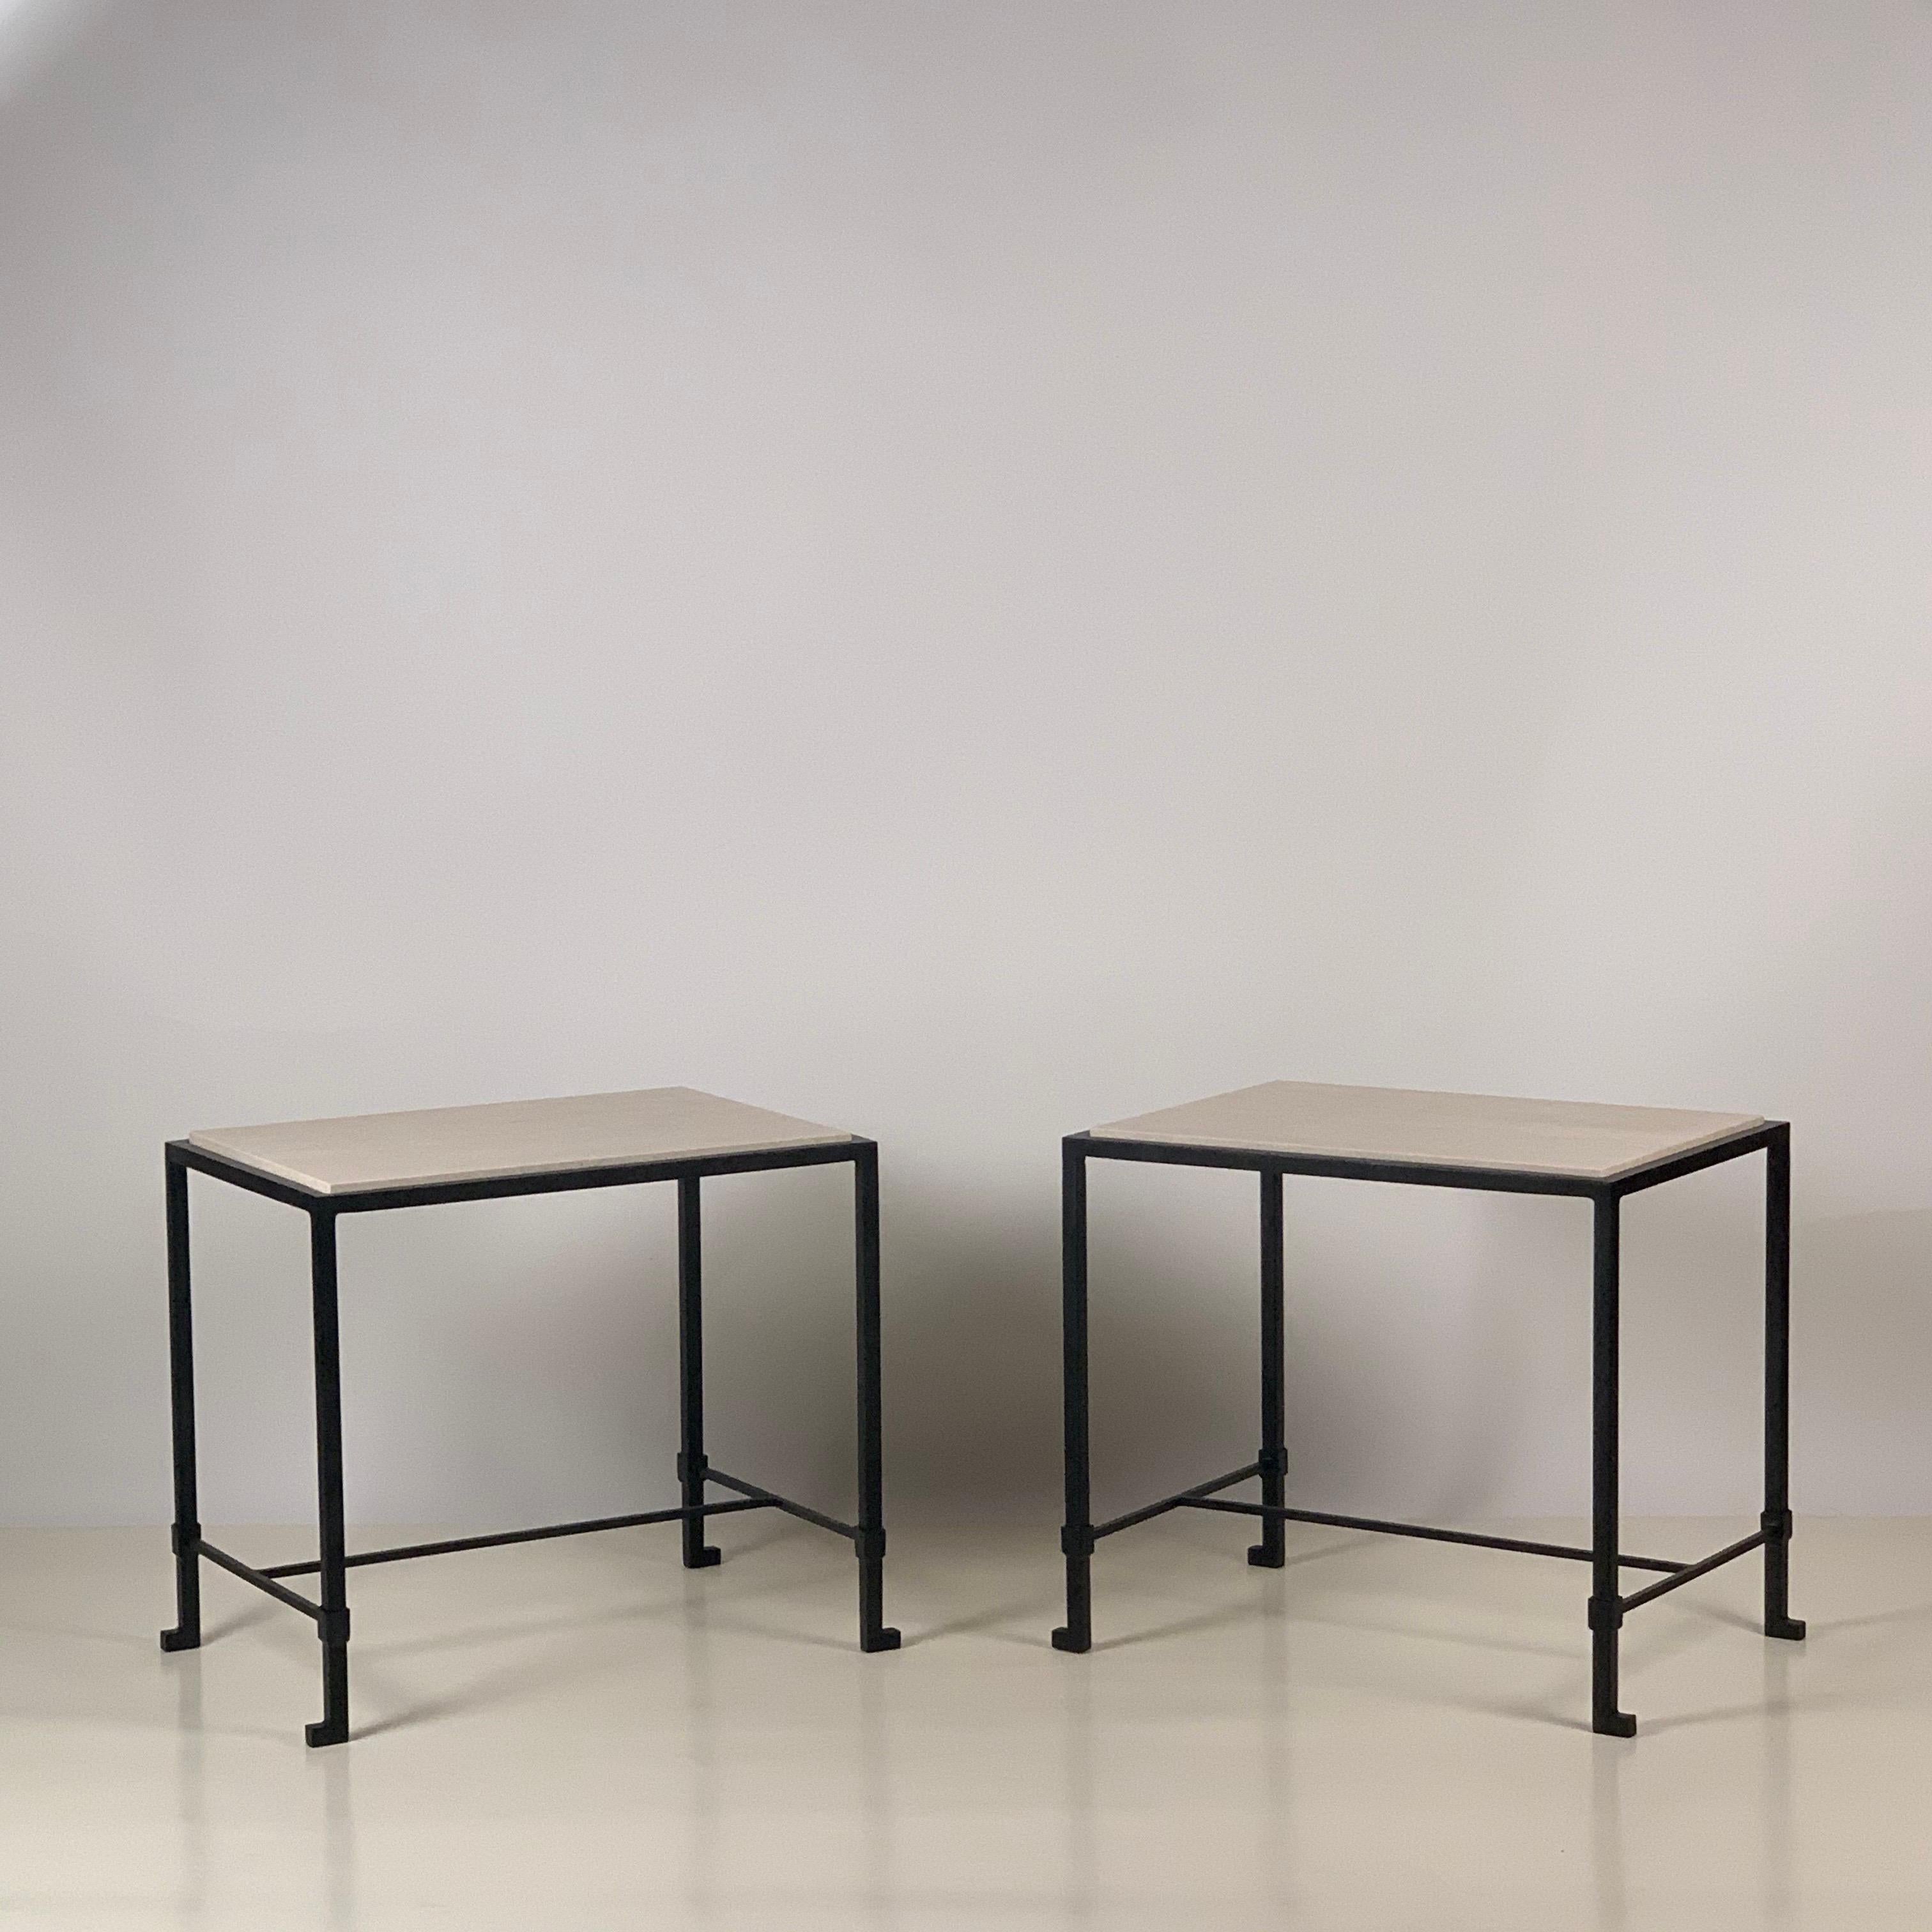 French Pair of 'Diagramme' Blackened Iron and Travertine End Tables by Design Frères For Sale